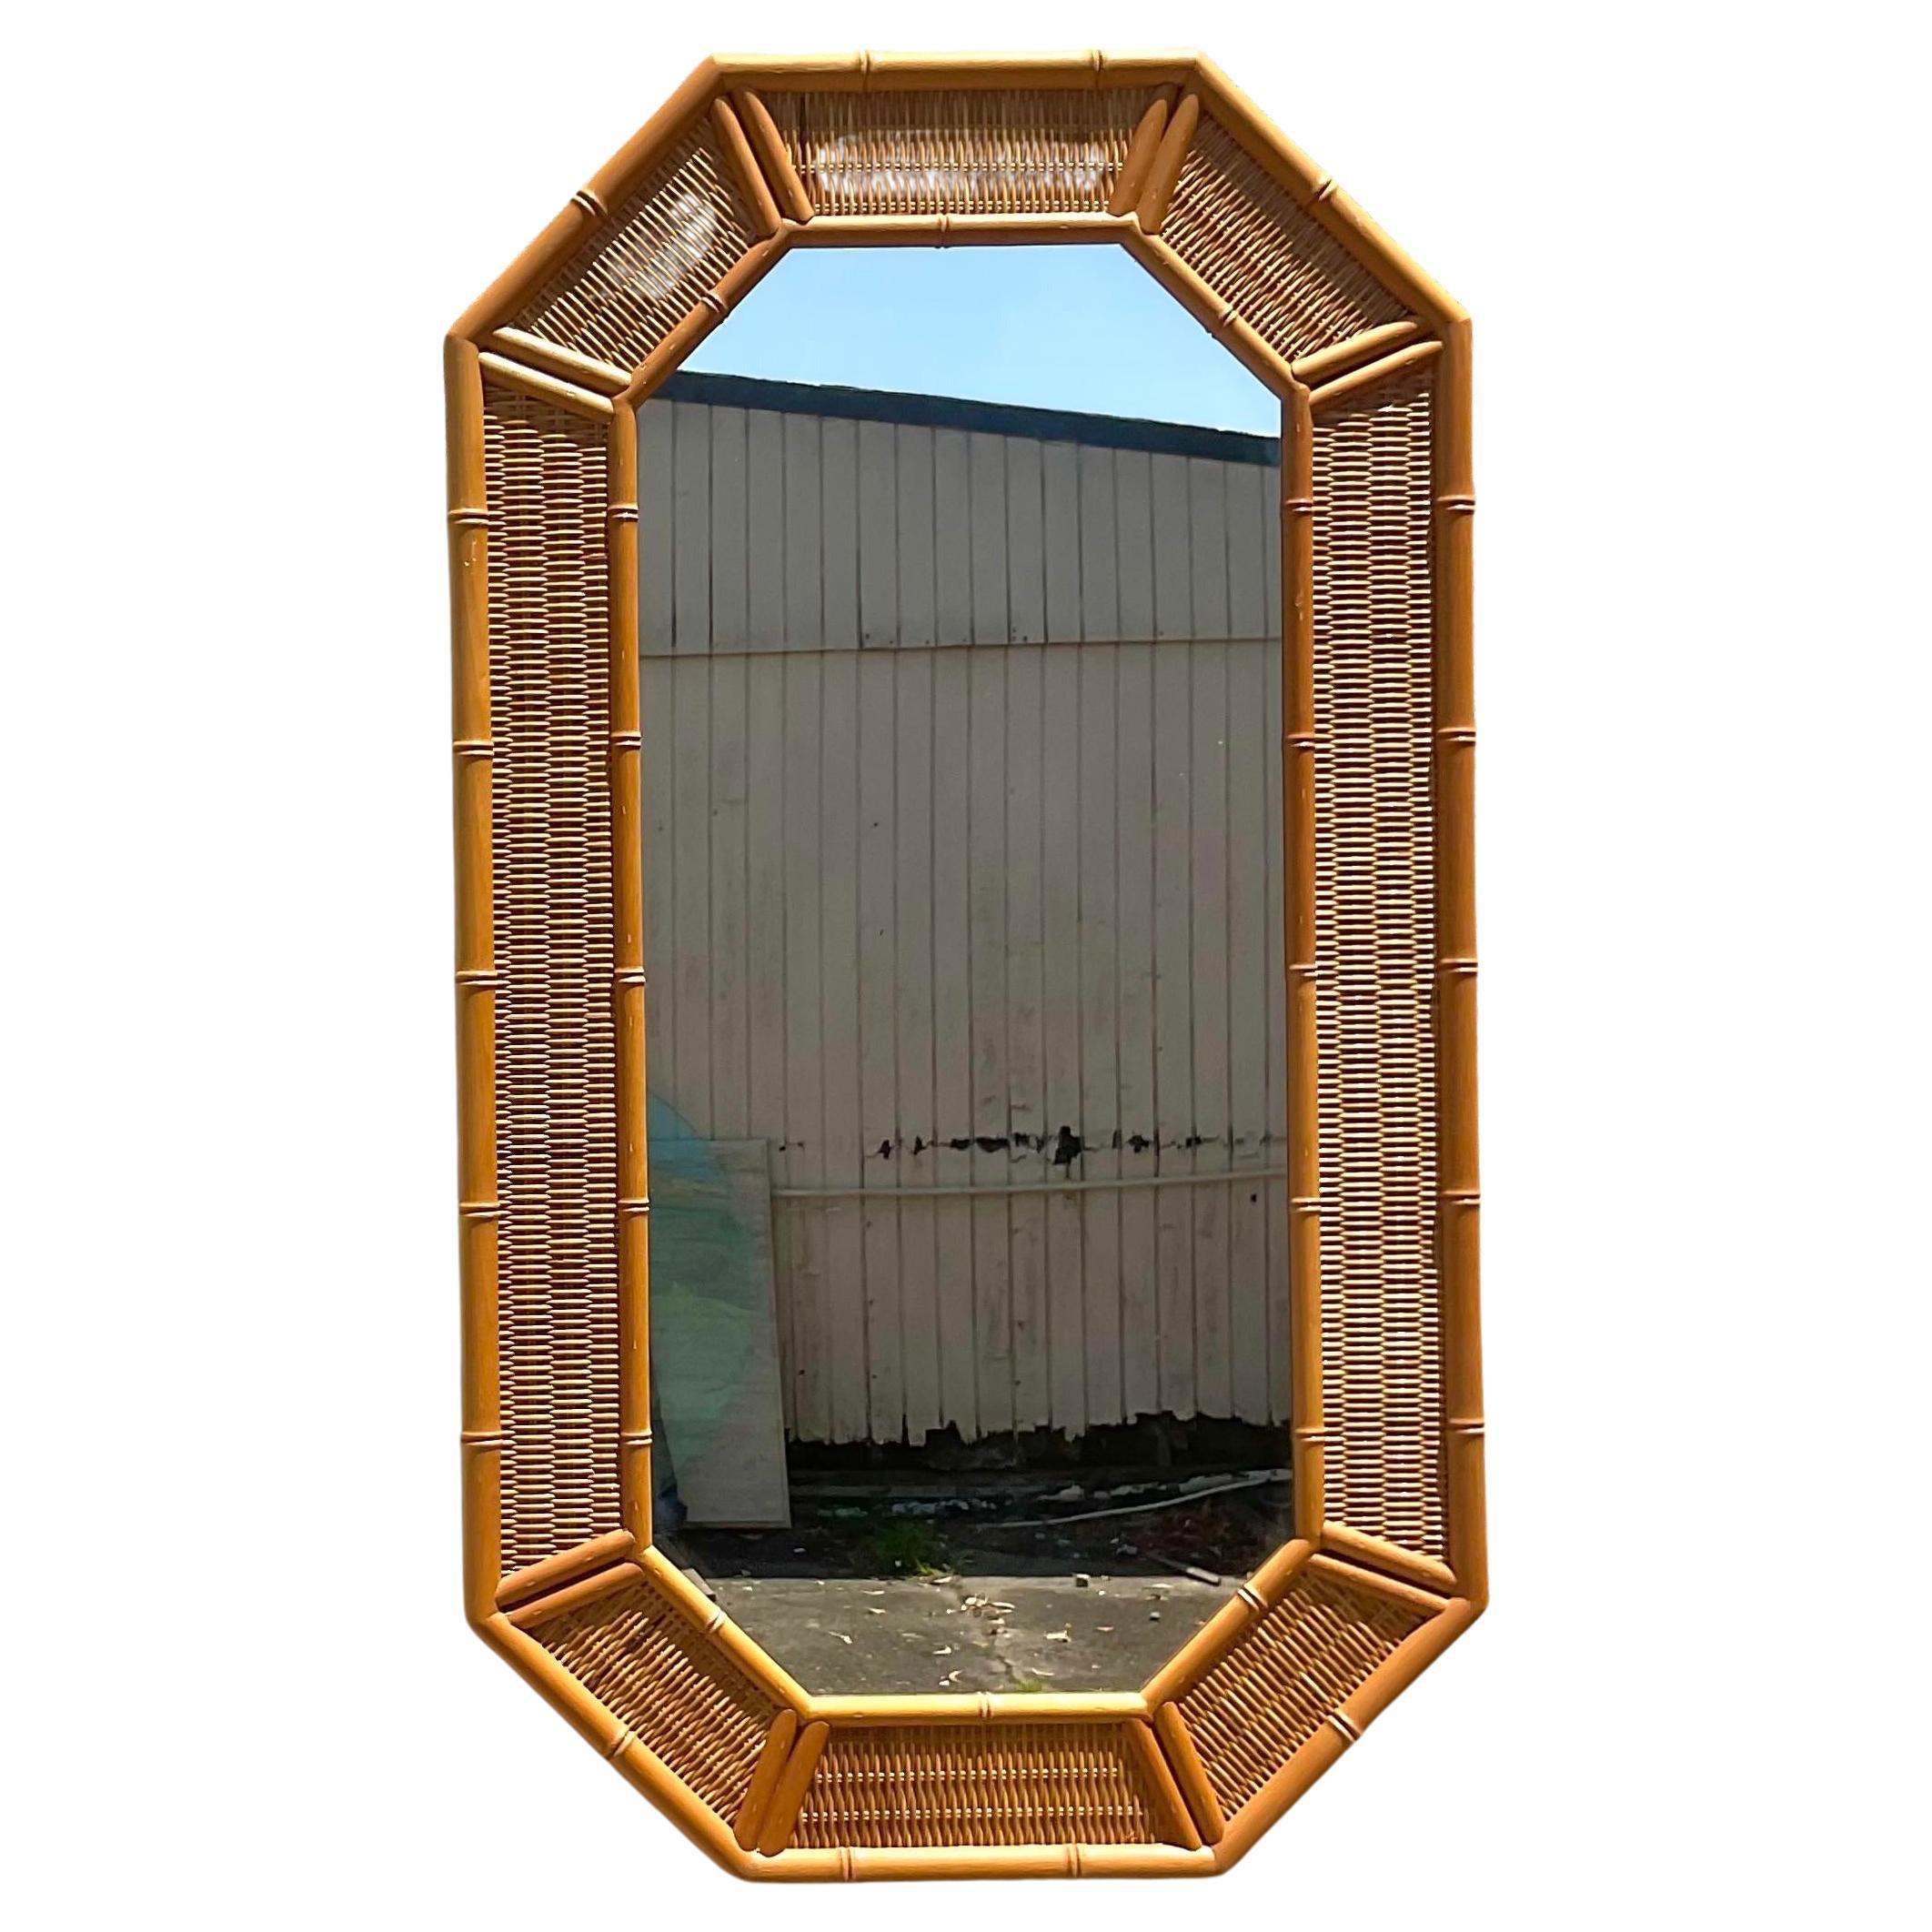 Bring coastal charm to your space with our Vintage Coastal Octagon Woven Rattan Mirror. American-crafted with a unique octagon shape and woven rattan detailing, this mirror combines classic design with natural elements, offering a breezy and elegant